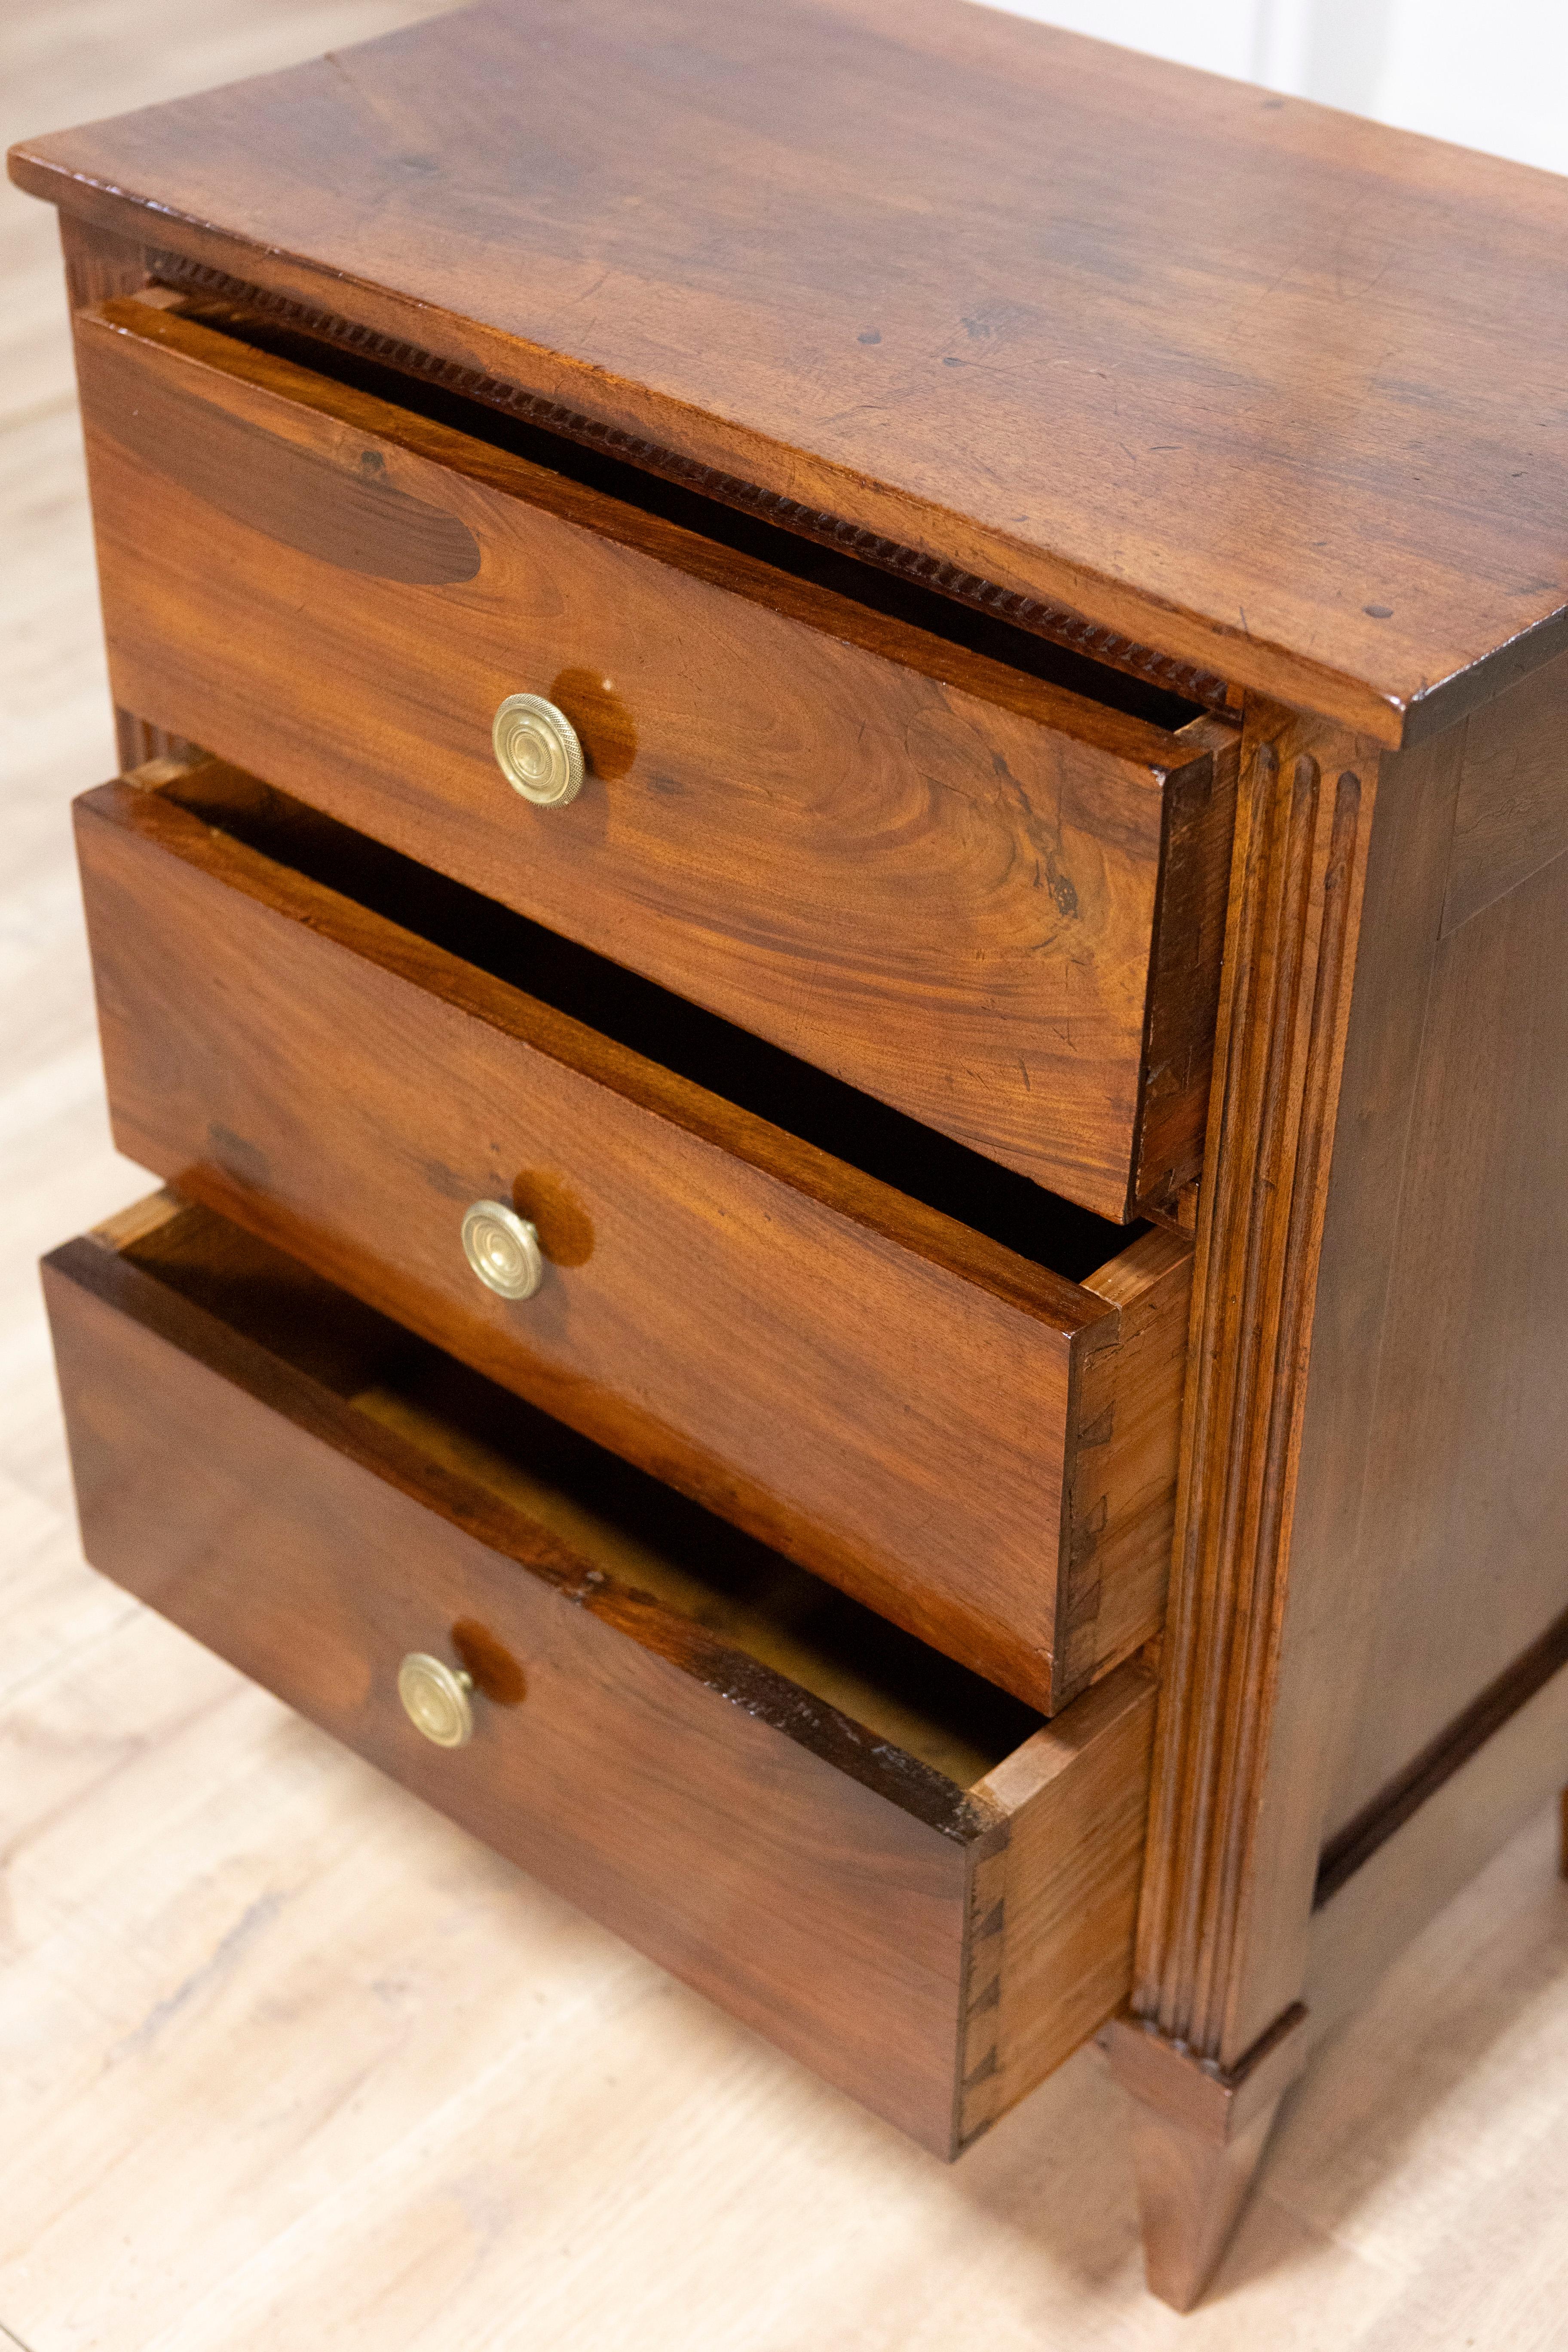 Italian Directoire Period Late 18th Century Three Drawer Walnut Bedside Chest In Good Condition For Sale In Atlanta, GA